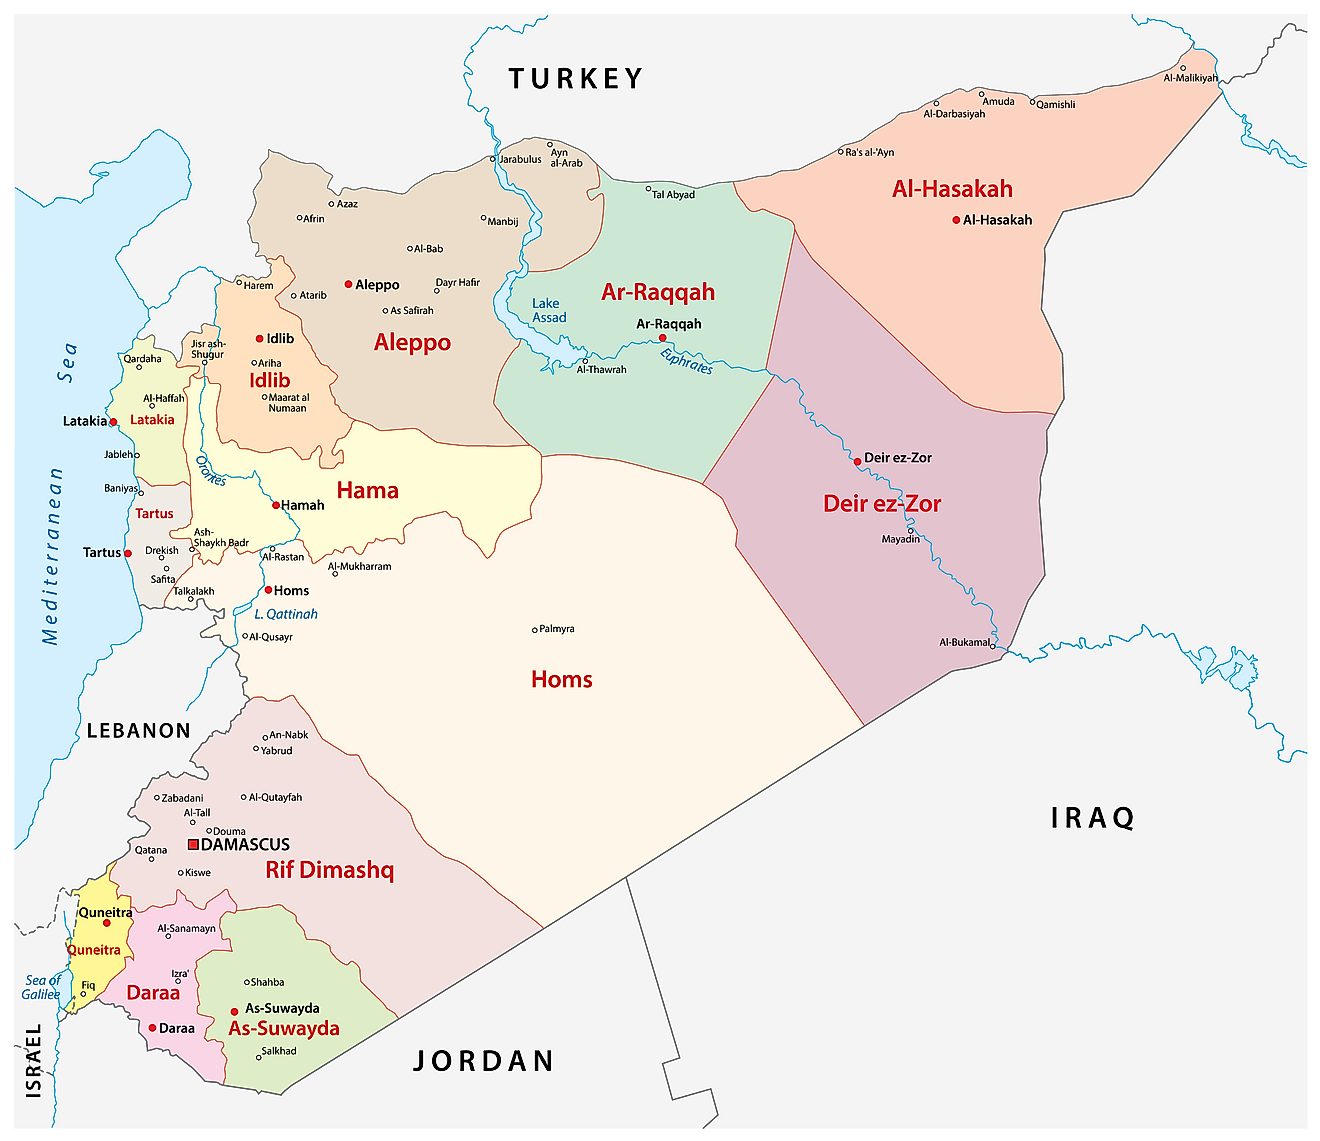 Political Map of Syria showing the 14 governorates, their capitals, and the national capital of Damascus.